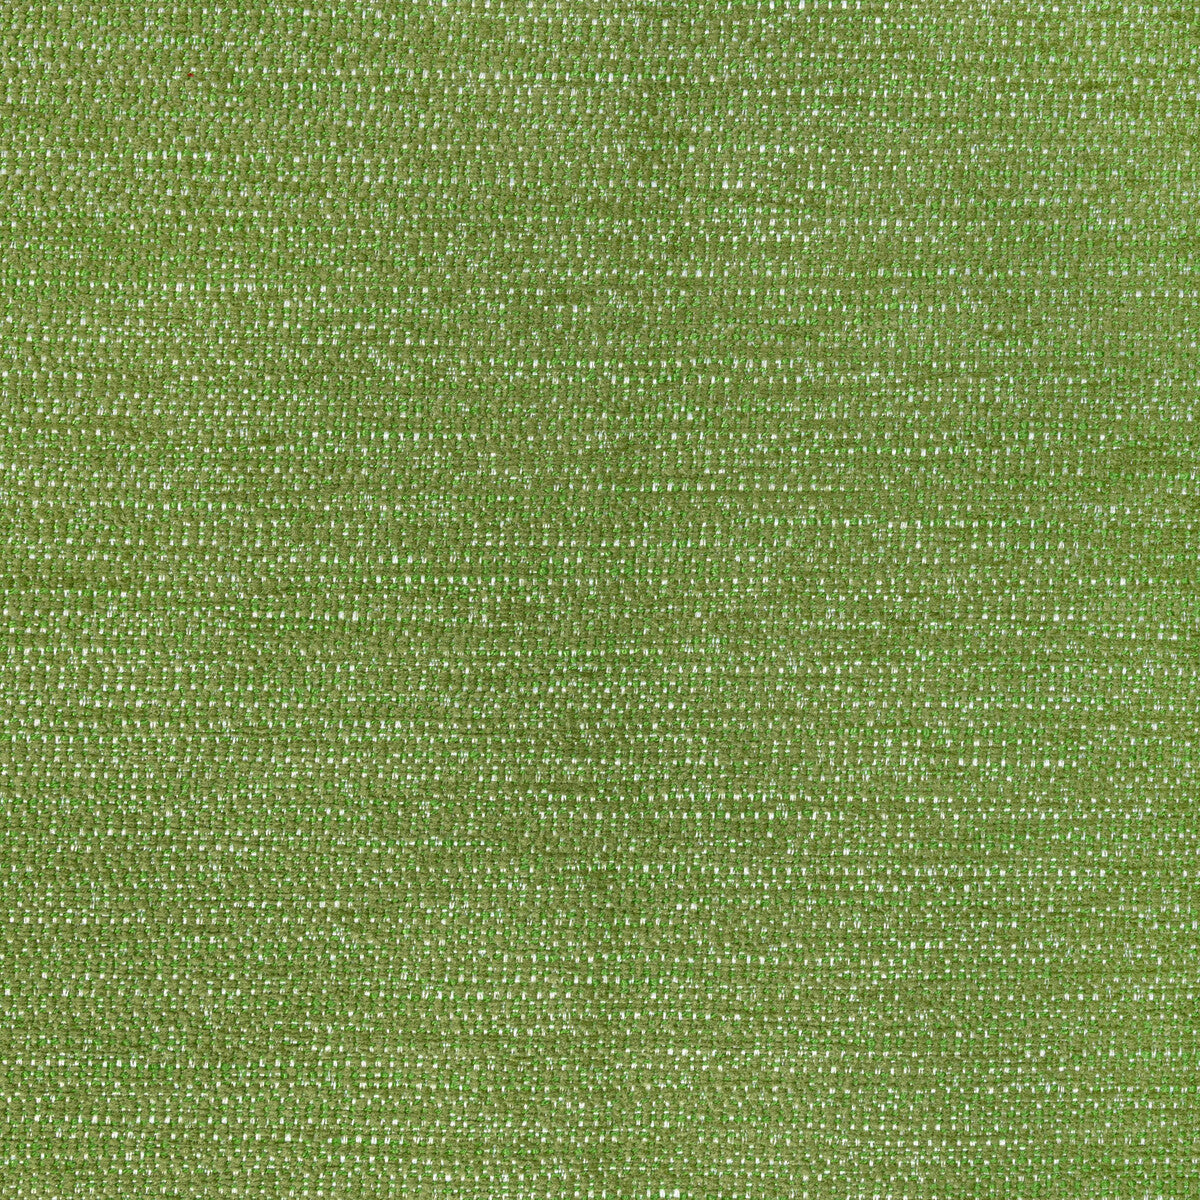 Recoup fabric in sea grass color - pattern 36569.3.0 - by Kravet Contract in the Seaqual collection